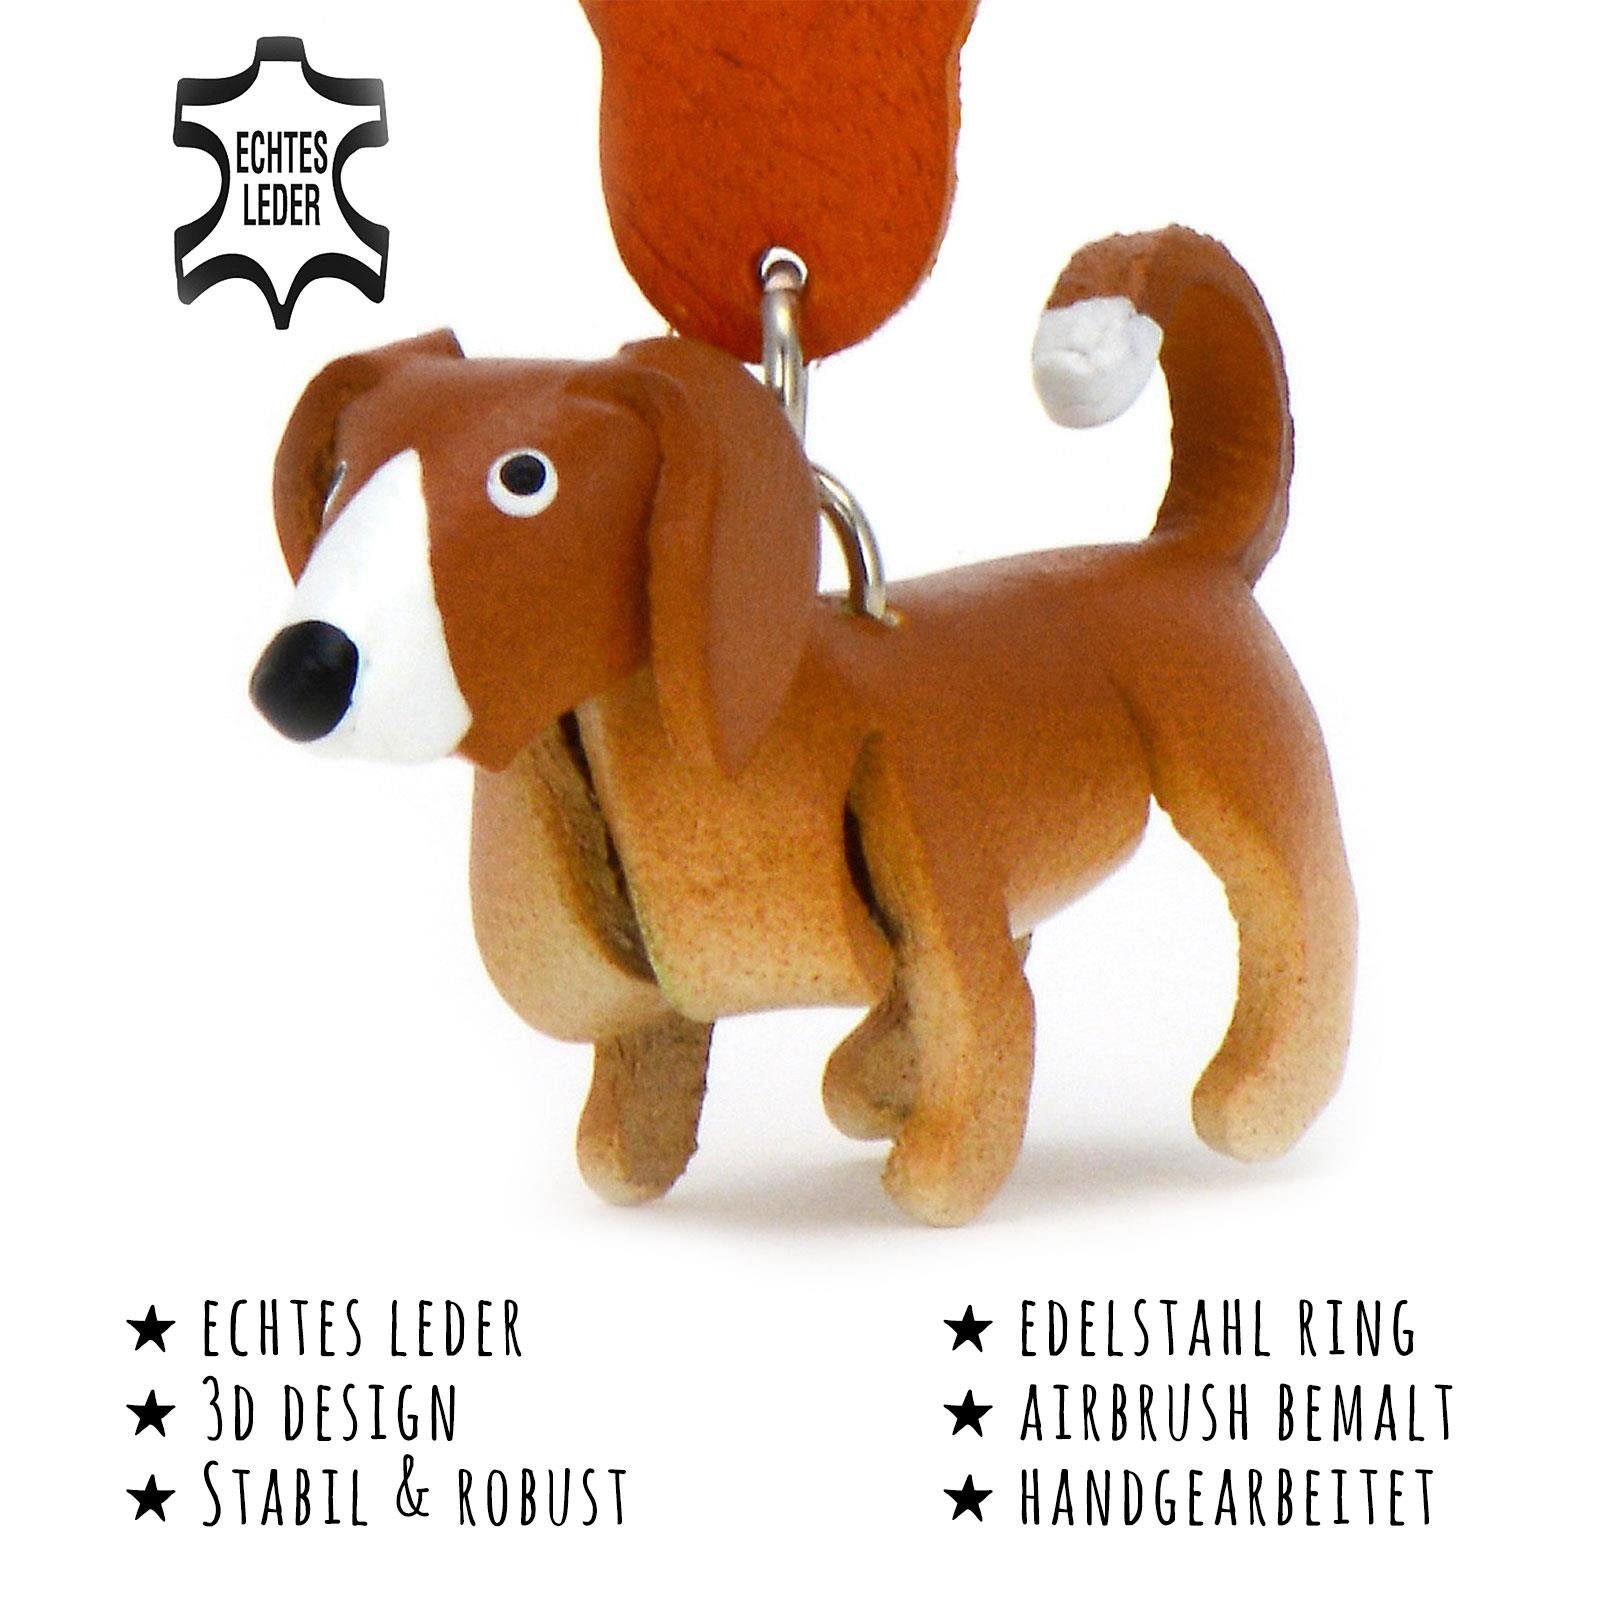 Kinder Accessoires Monkimau Schlüsselanhänger Labrador Retriever Schlüsselanhänger Leder Tier (Packung)